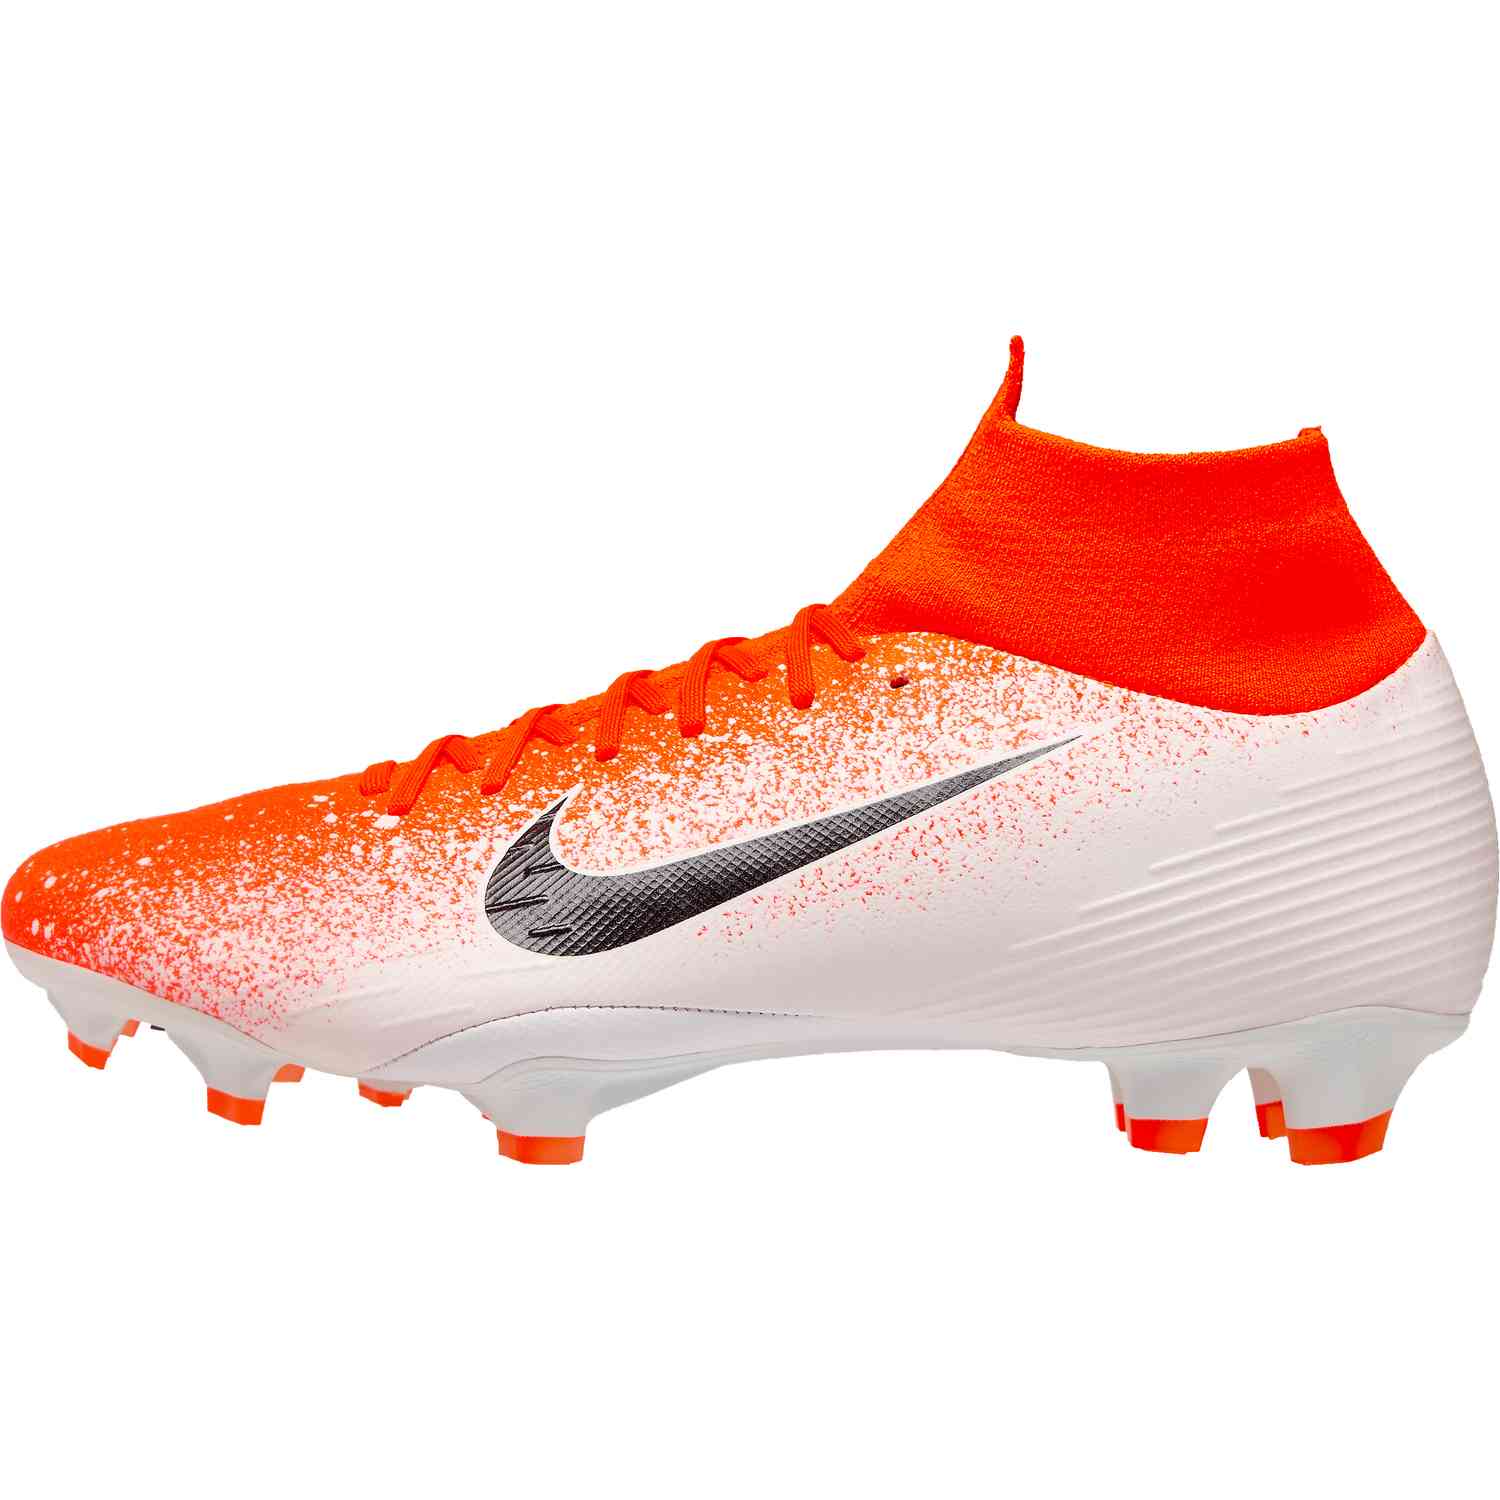 New Nike Mercurial Superfly 7 Pro AG PRO SOCCER SPORT.